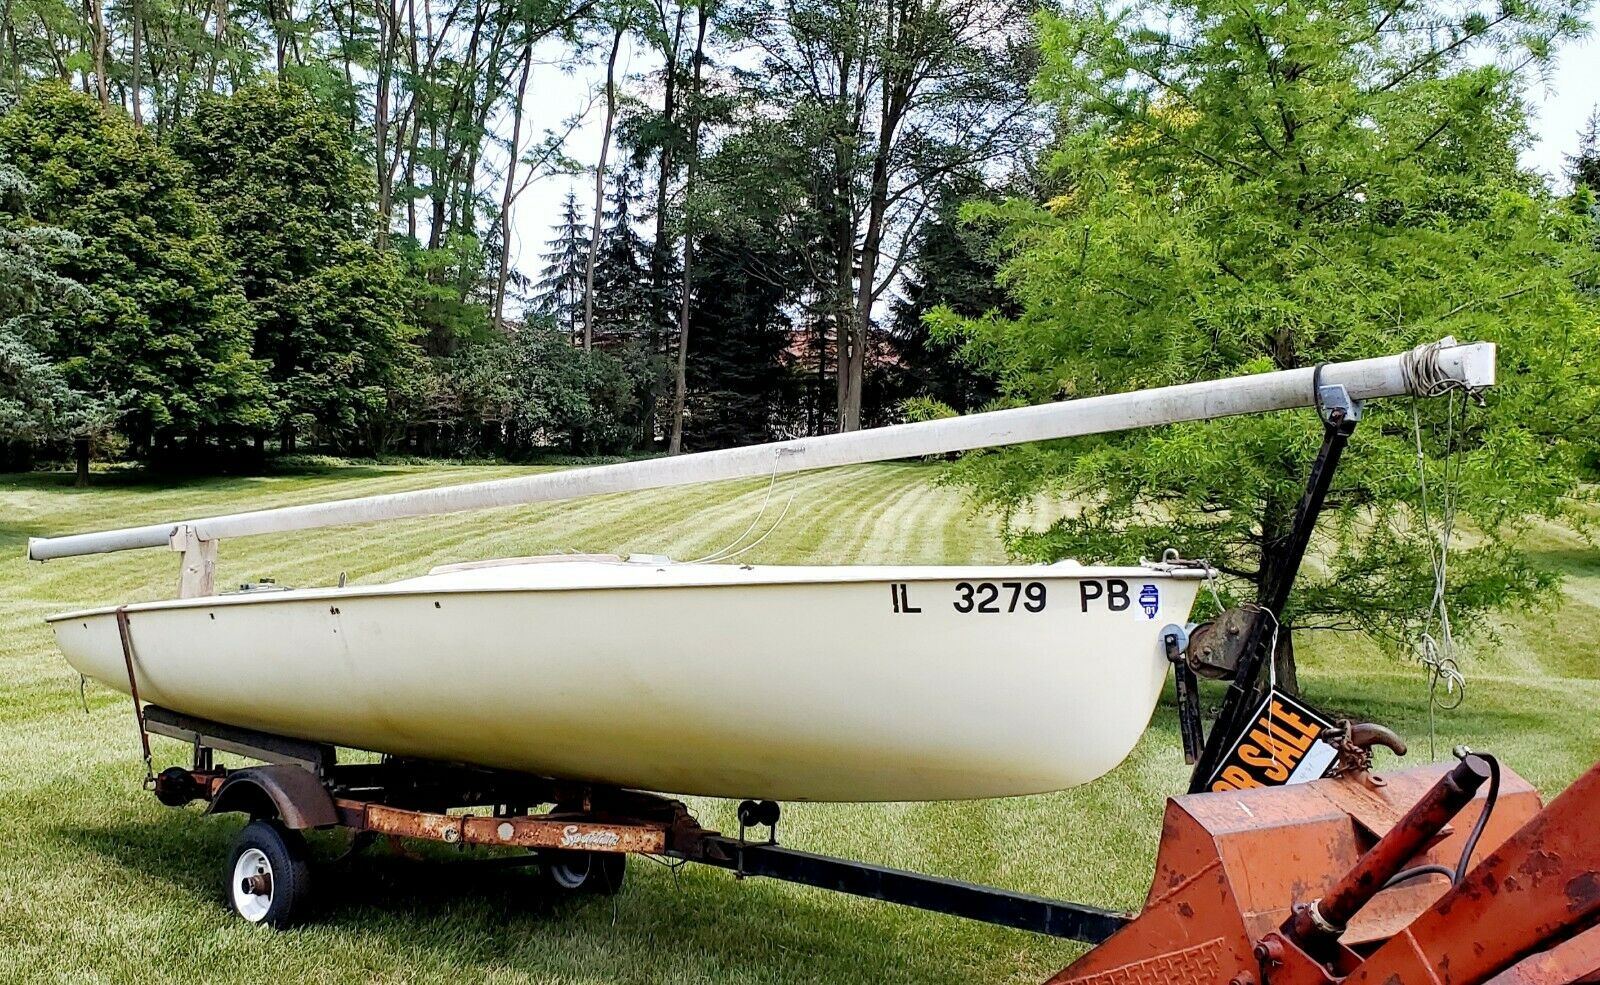 Vintage 15 feet Chrysler Mutineer Sailboat and Trailer - Excellent condition